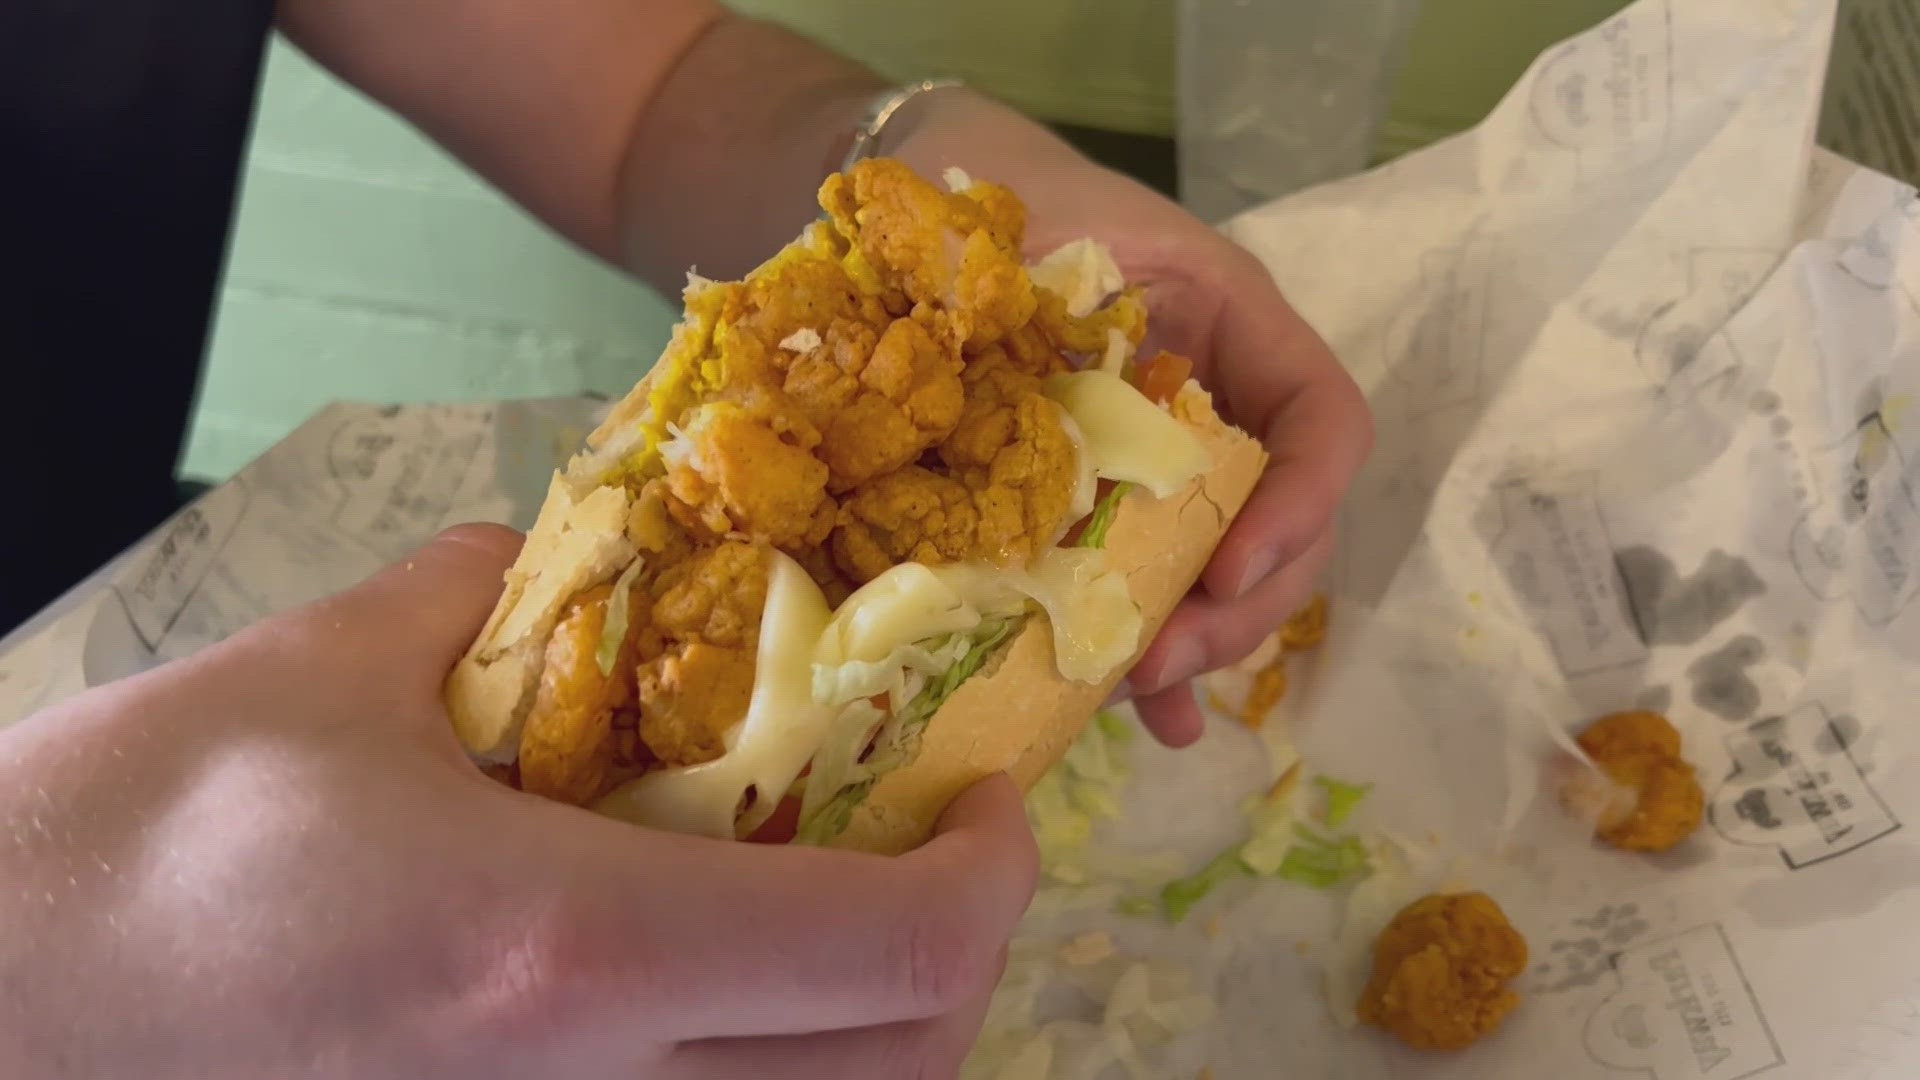 A decade ago, a 28-year-old man stepped up to save his brother and take him off of the transplant waiting list. Now he's helping save lives with shrimp po'boys.